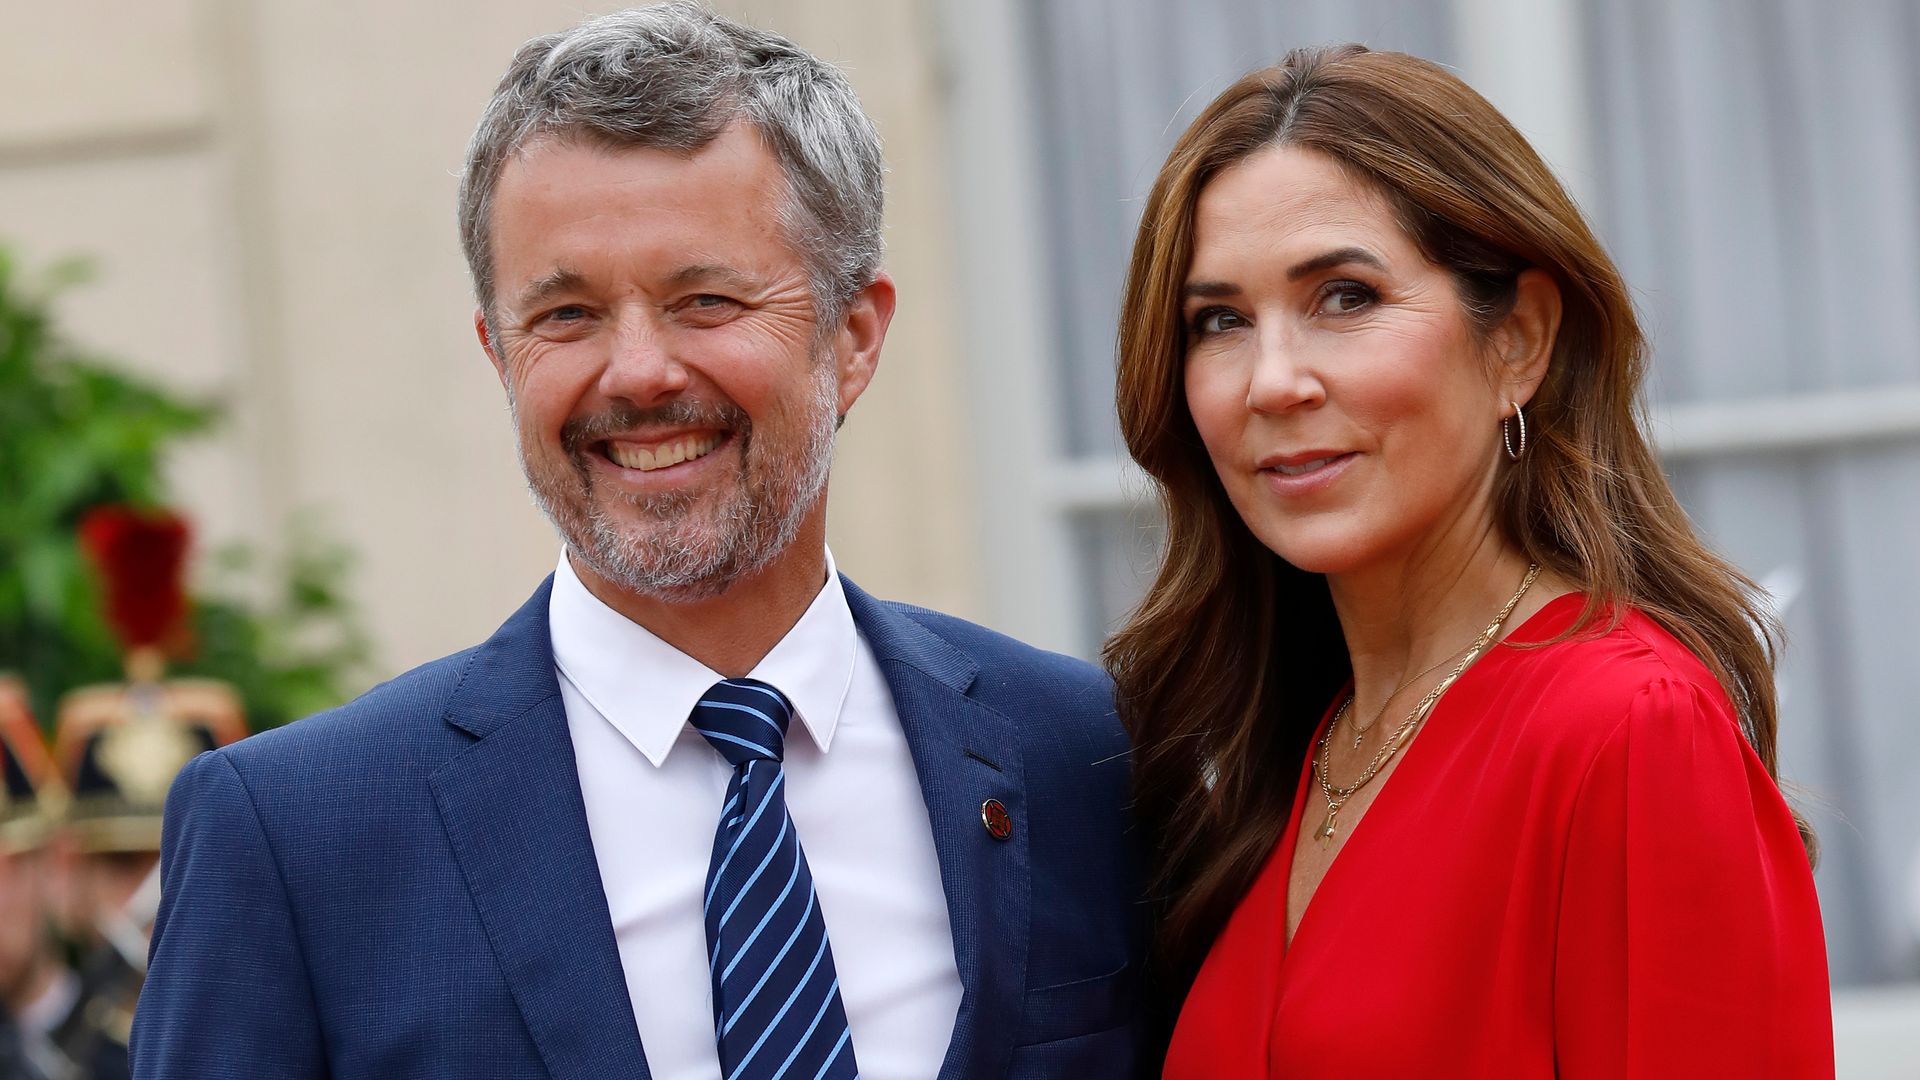 PARIS, FRANCE - JULY 26: King Frederik X of Denmark and Queen Mary of Denmark pose prior to the Olympics opening ceremony at Elysee Palace on July 26, 2024 in Paris, France. (Photo by Antoine Gyori - Corbis/Corbis via Getty Images)